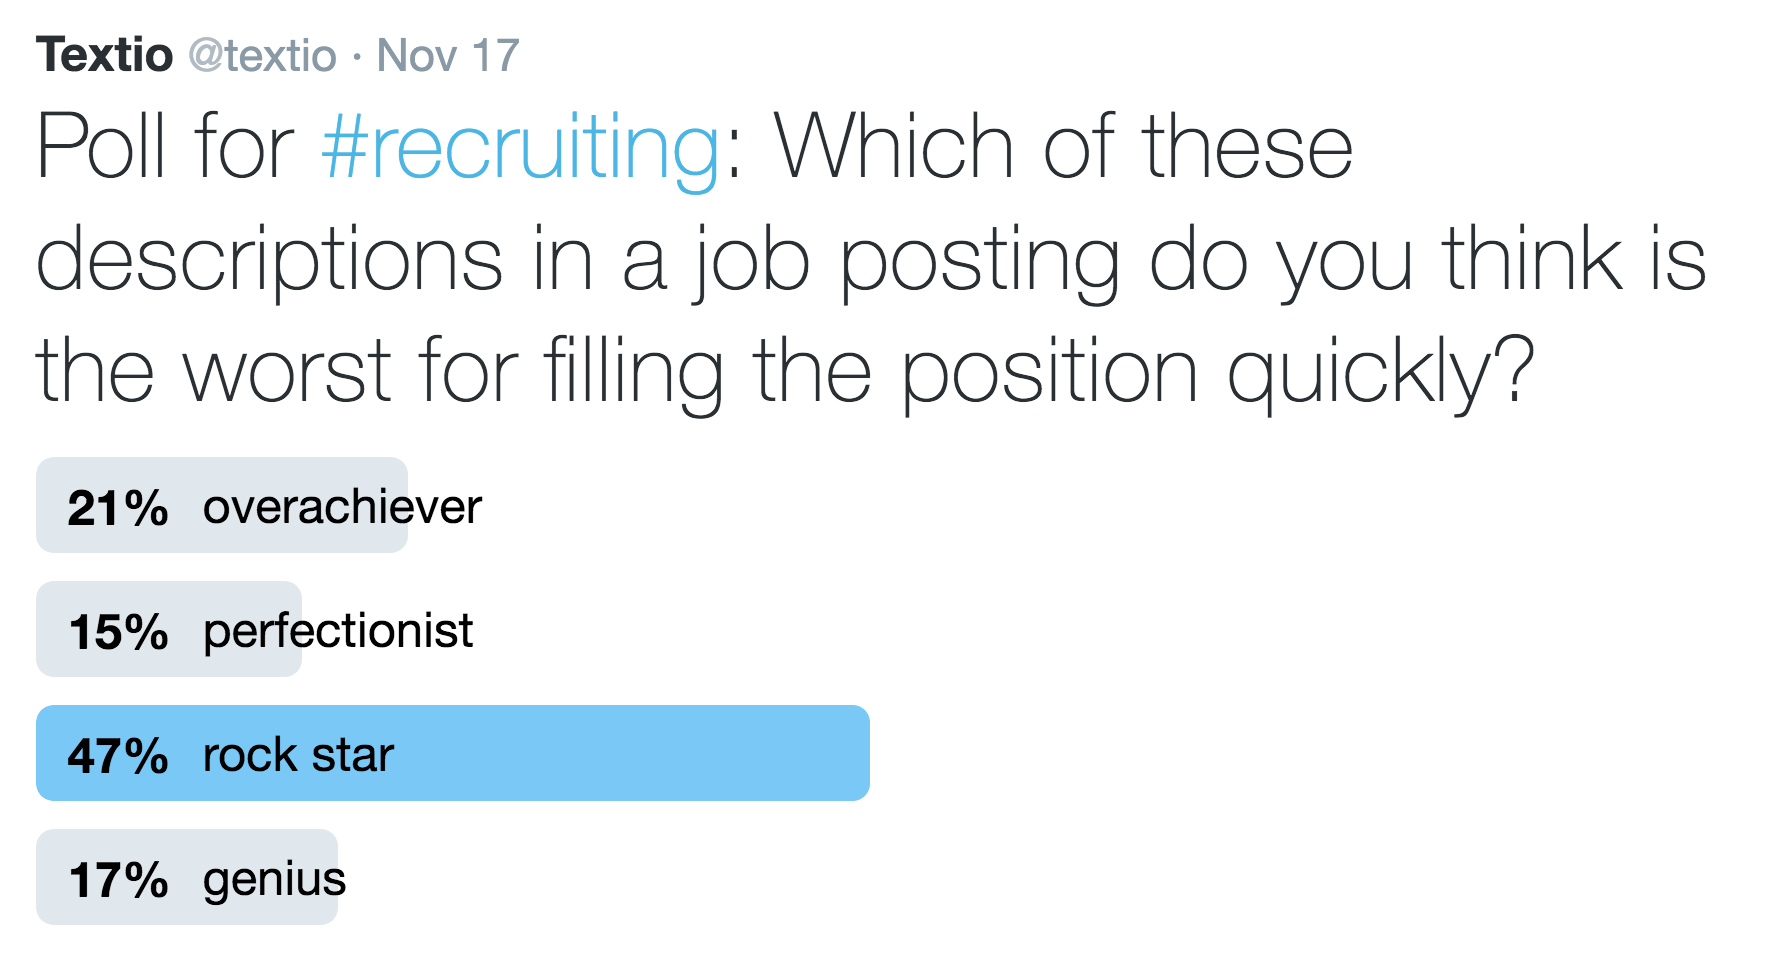 Image of Tweet. Poll for recruiting: which of these descriptions in a job posting do you think is the worst for filling the position quickly?  21% overachiever, 15% perfectionist, 47% rock star, 17% genius